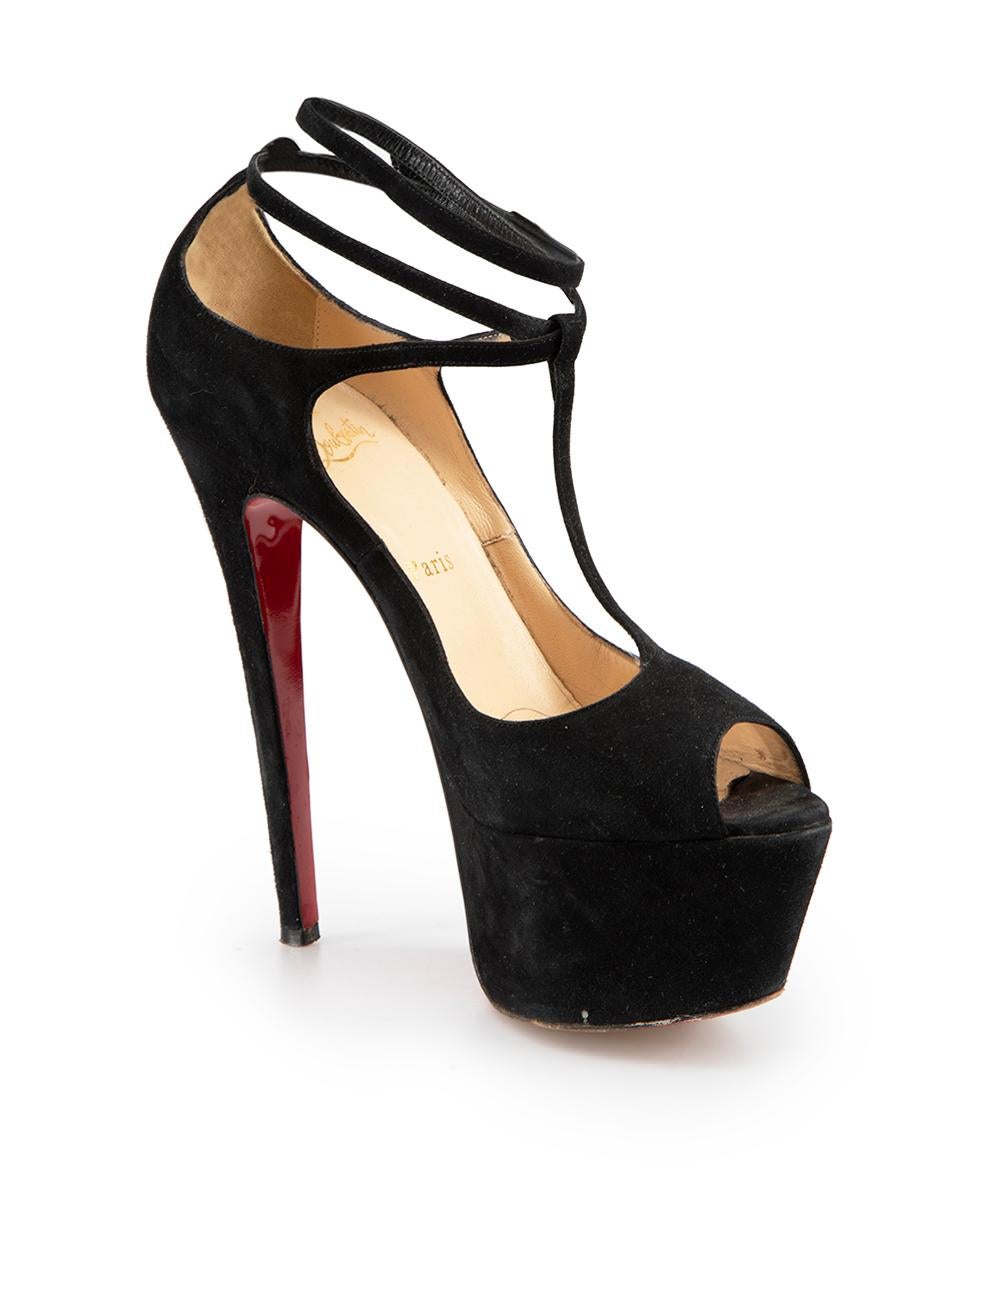 CONDITION is Good. Minor wear to shoes is evident. Light wear to both shoe uppers, platforms and heel-stems with abrasions to the suede on this used Christian Louboutin designer resale item.
  
Details
Black
Suede
Heels
Platform
High heeled
Peep